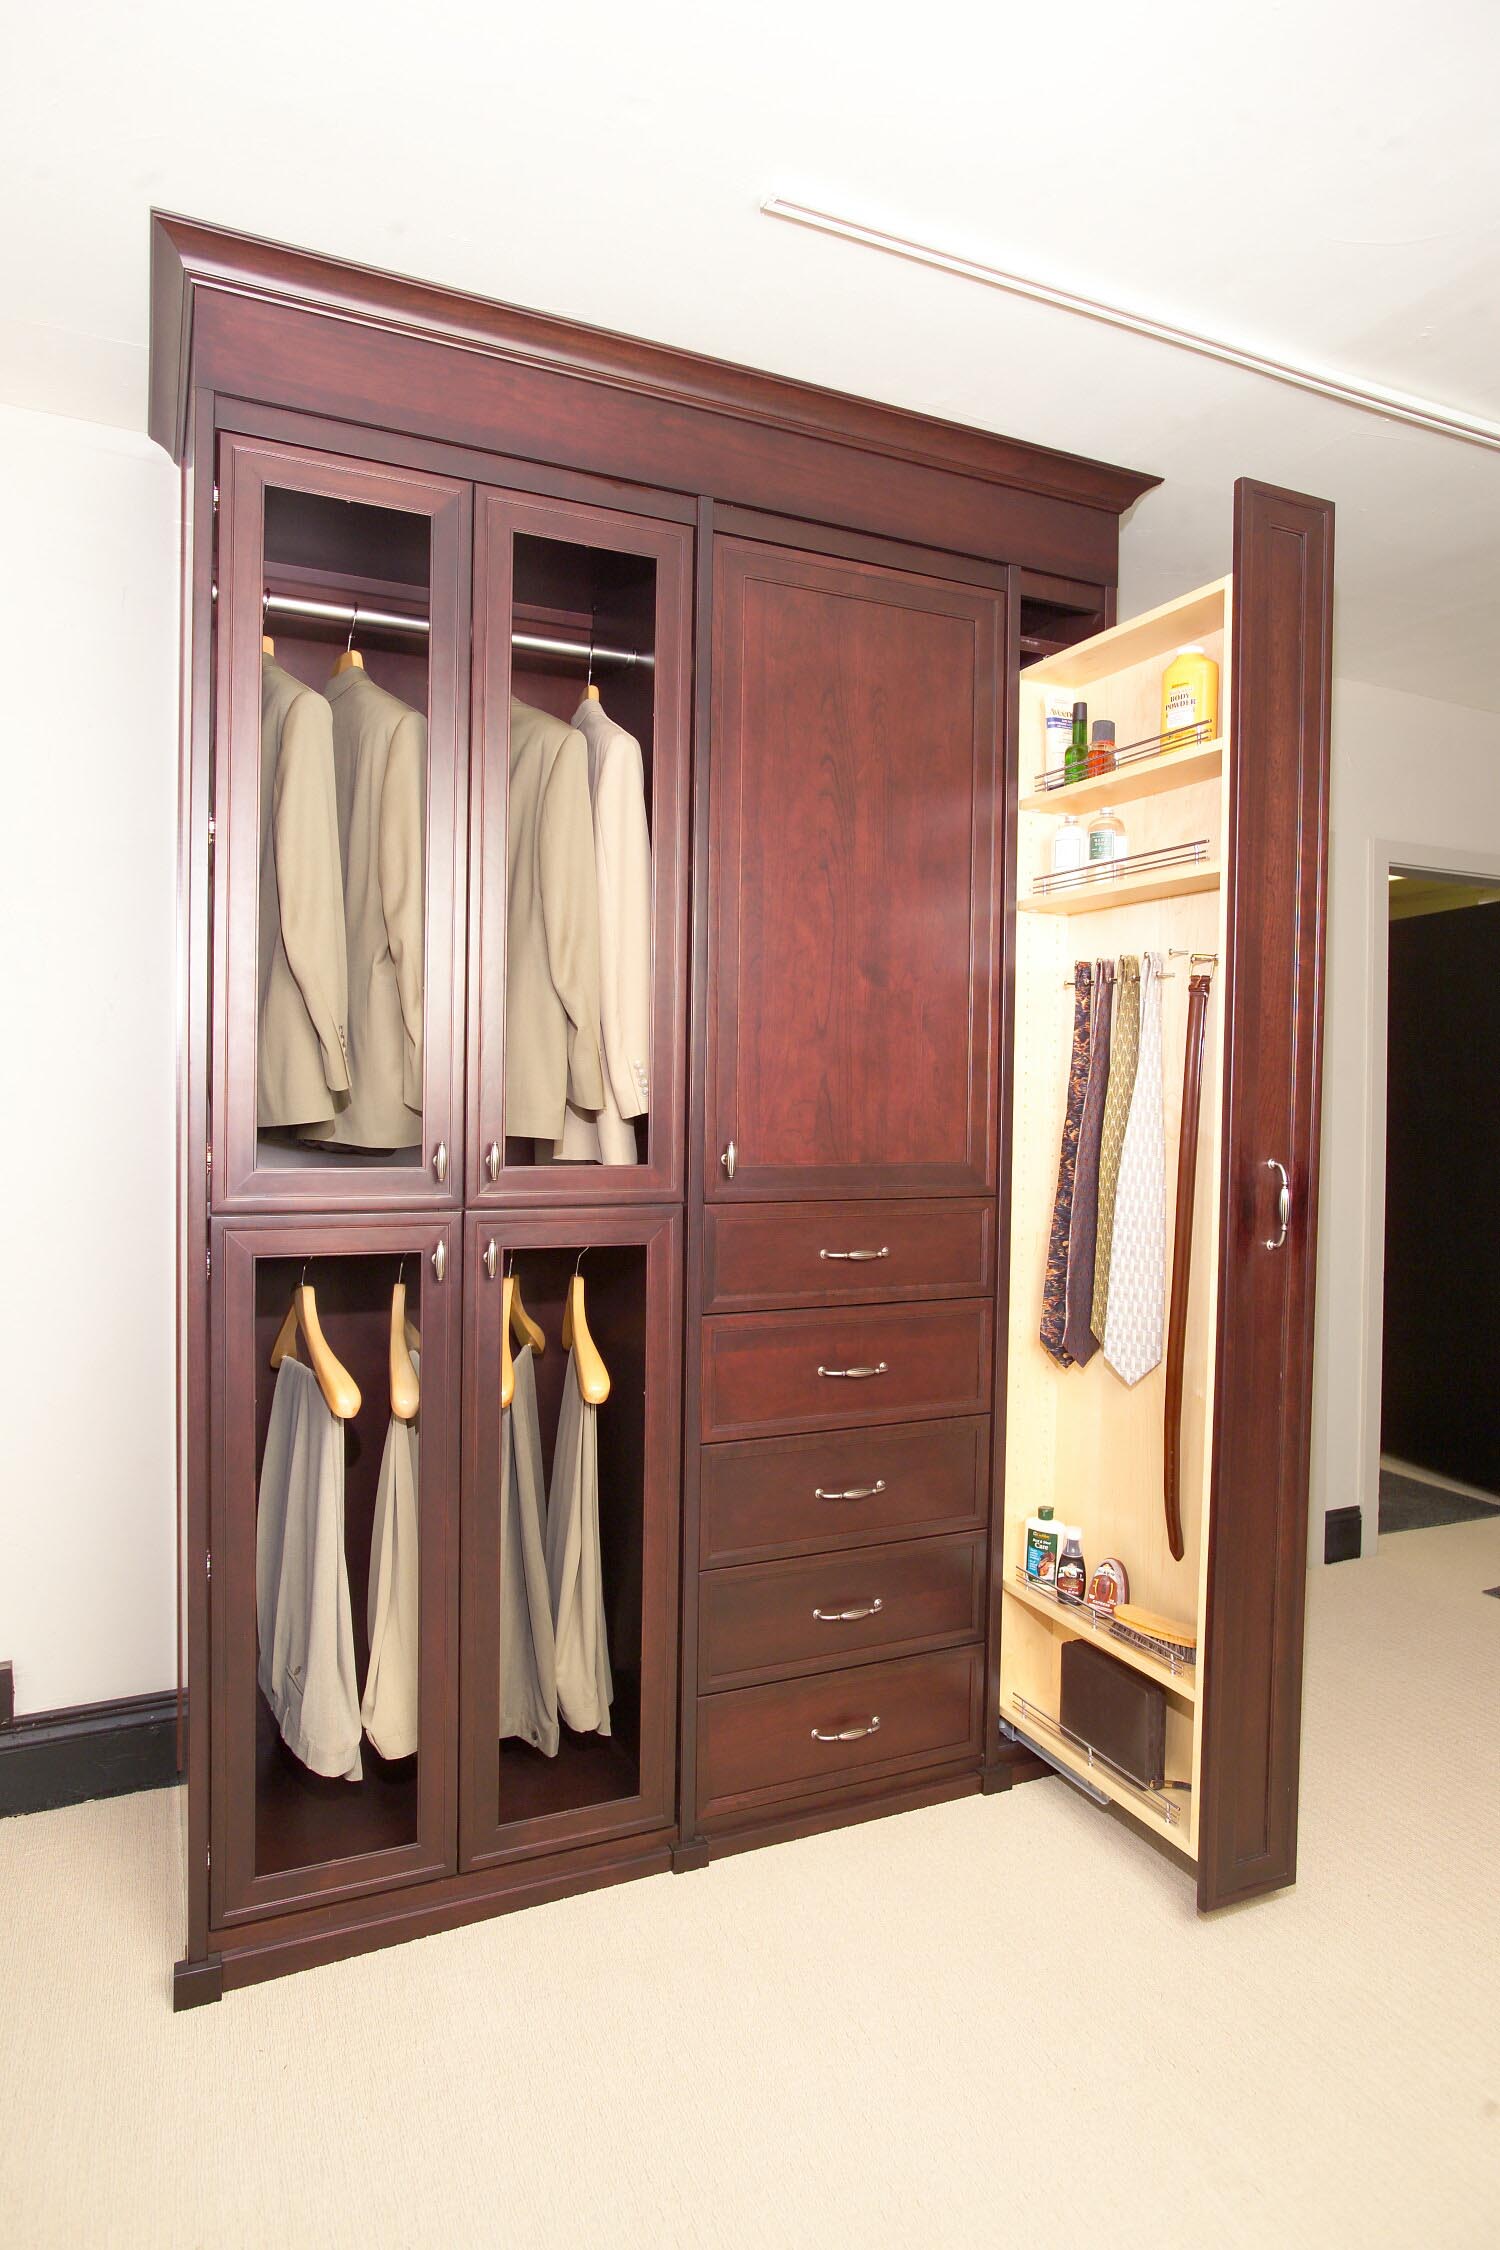 A Organized Closet Filled With Suits And Ties Custom Closets Alpha Closets & Company Inc, 6084 Gulf Breeze Pkwy, Gulf Breeze